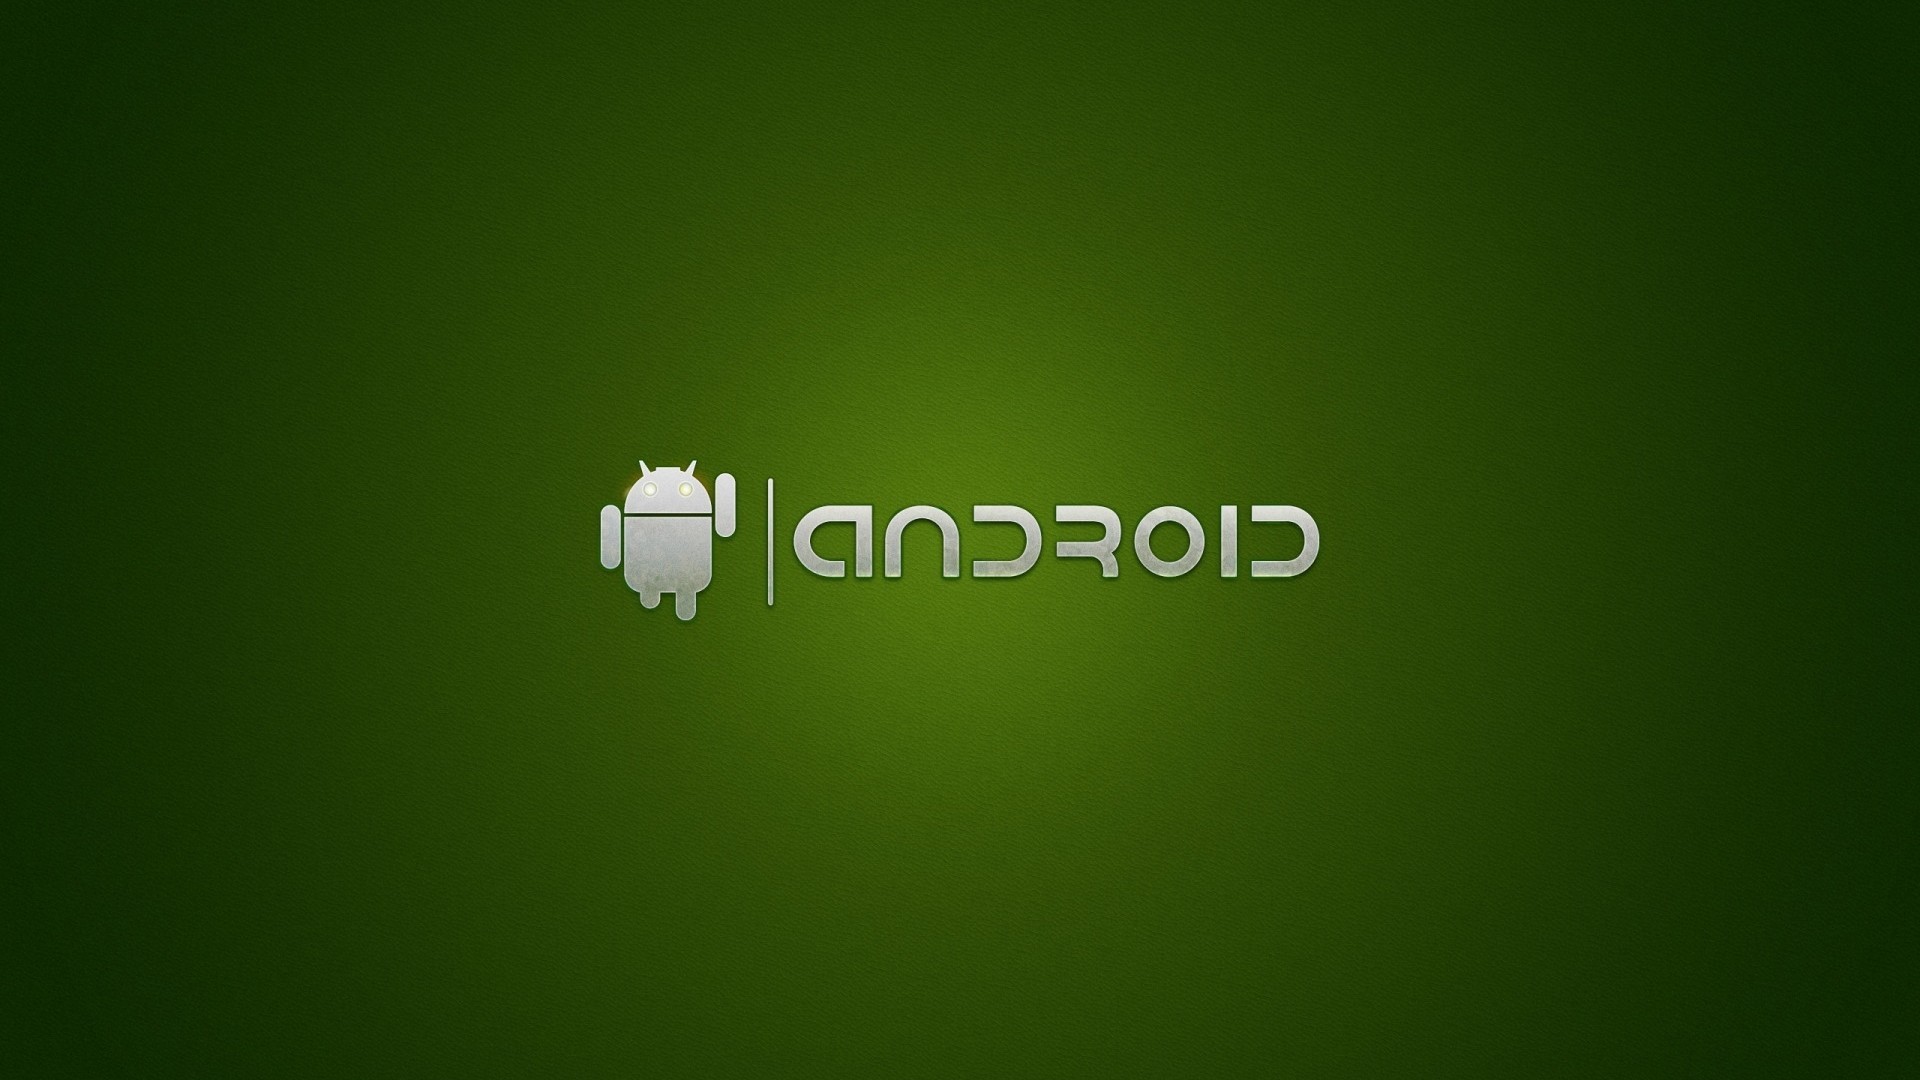 General 1920x1080 green artwork simple background text Android (operating system) operating system